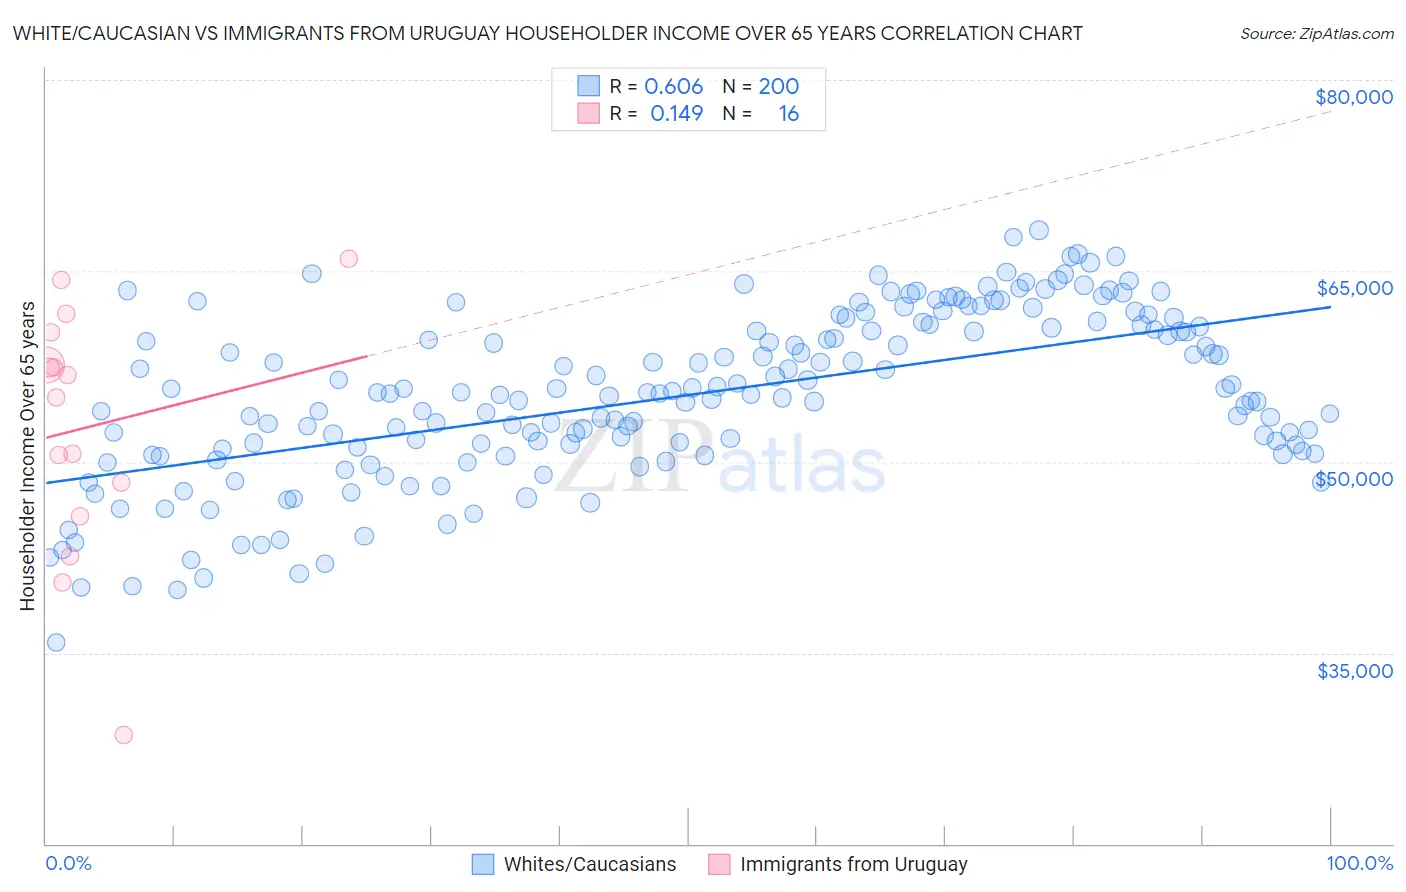 White/Caucasian vs Immigrants from Uruguay Householder Income Over 65 years